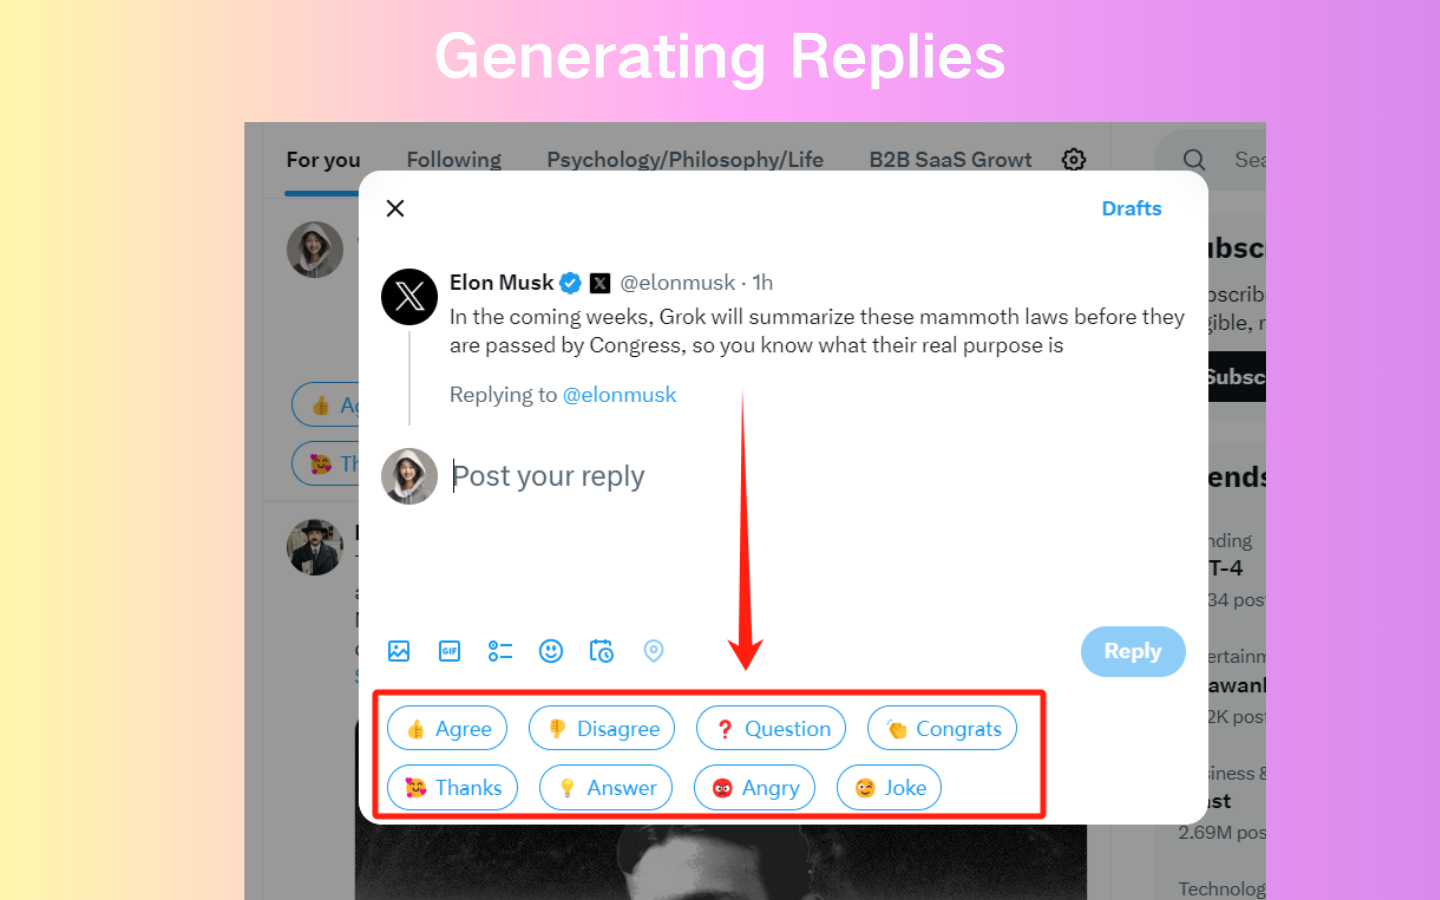 Twitter Generator can directly generate replies with one click in the comment section